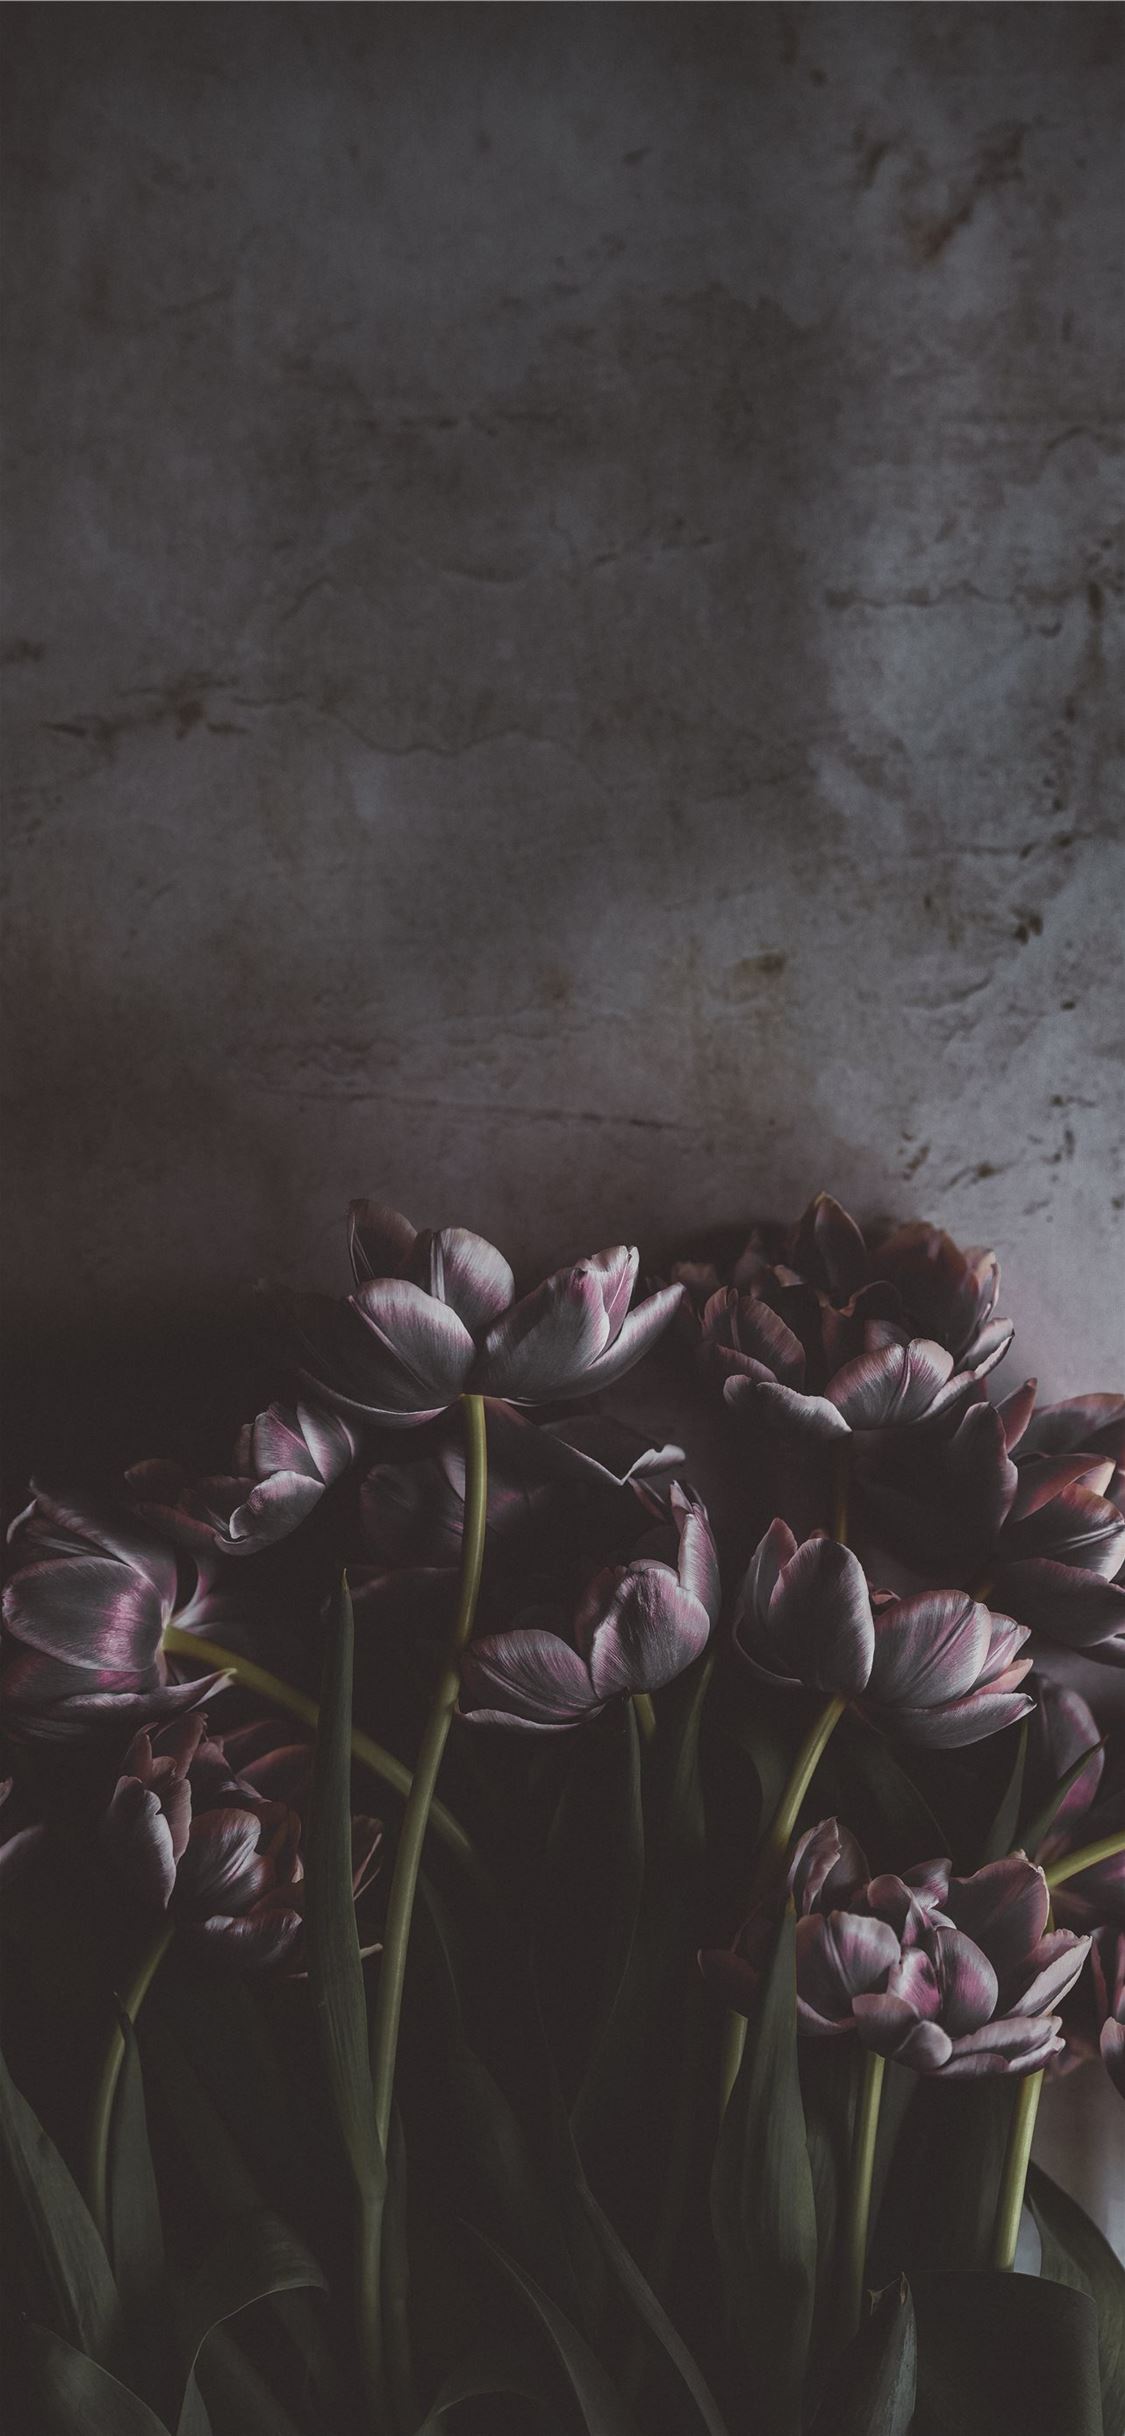 Vintage Style Wallpaper, Red and White Flowers on Black Background |  lifencolors